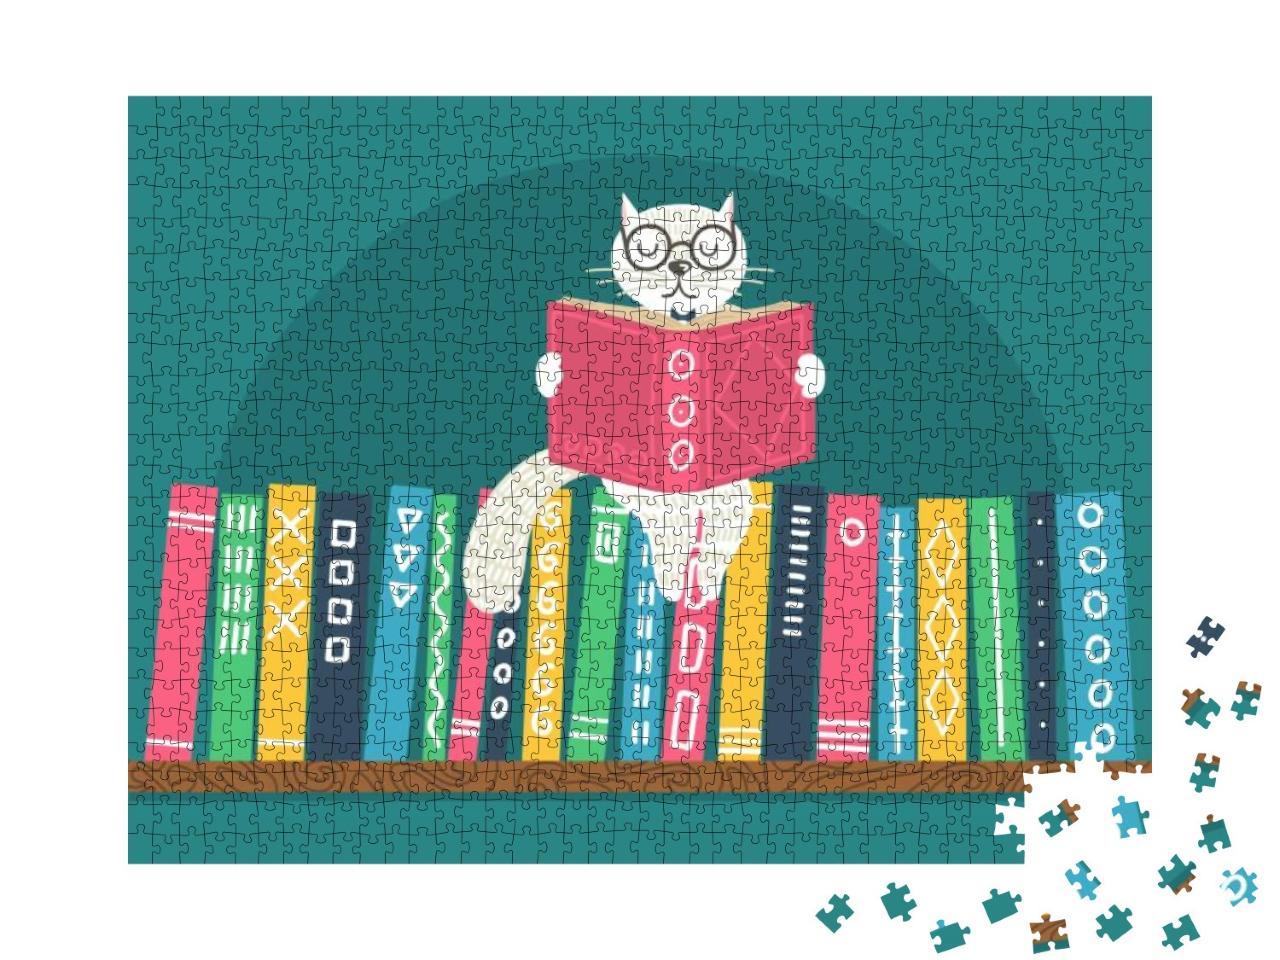 Bookshelf with Fantasy Clever White Cat Reading Book on T... Jigsaw Puzzle with 1000 pieces